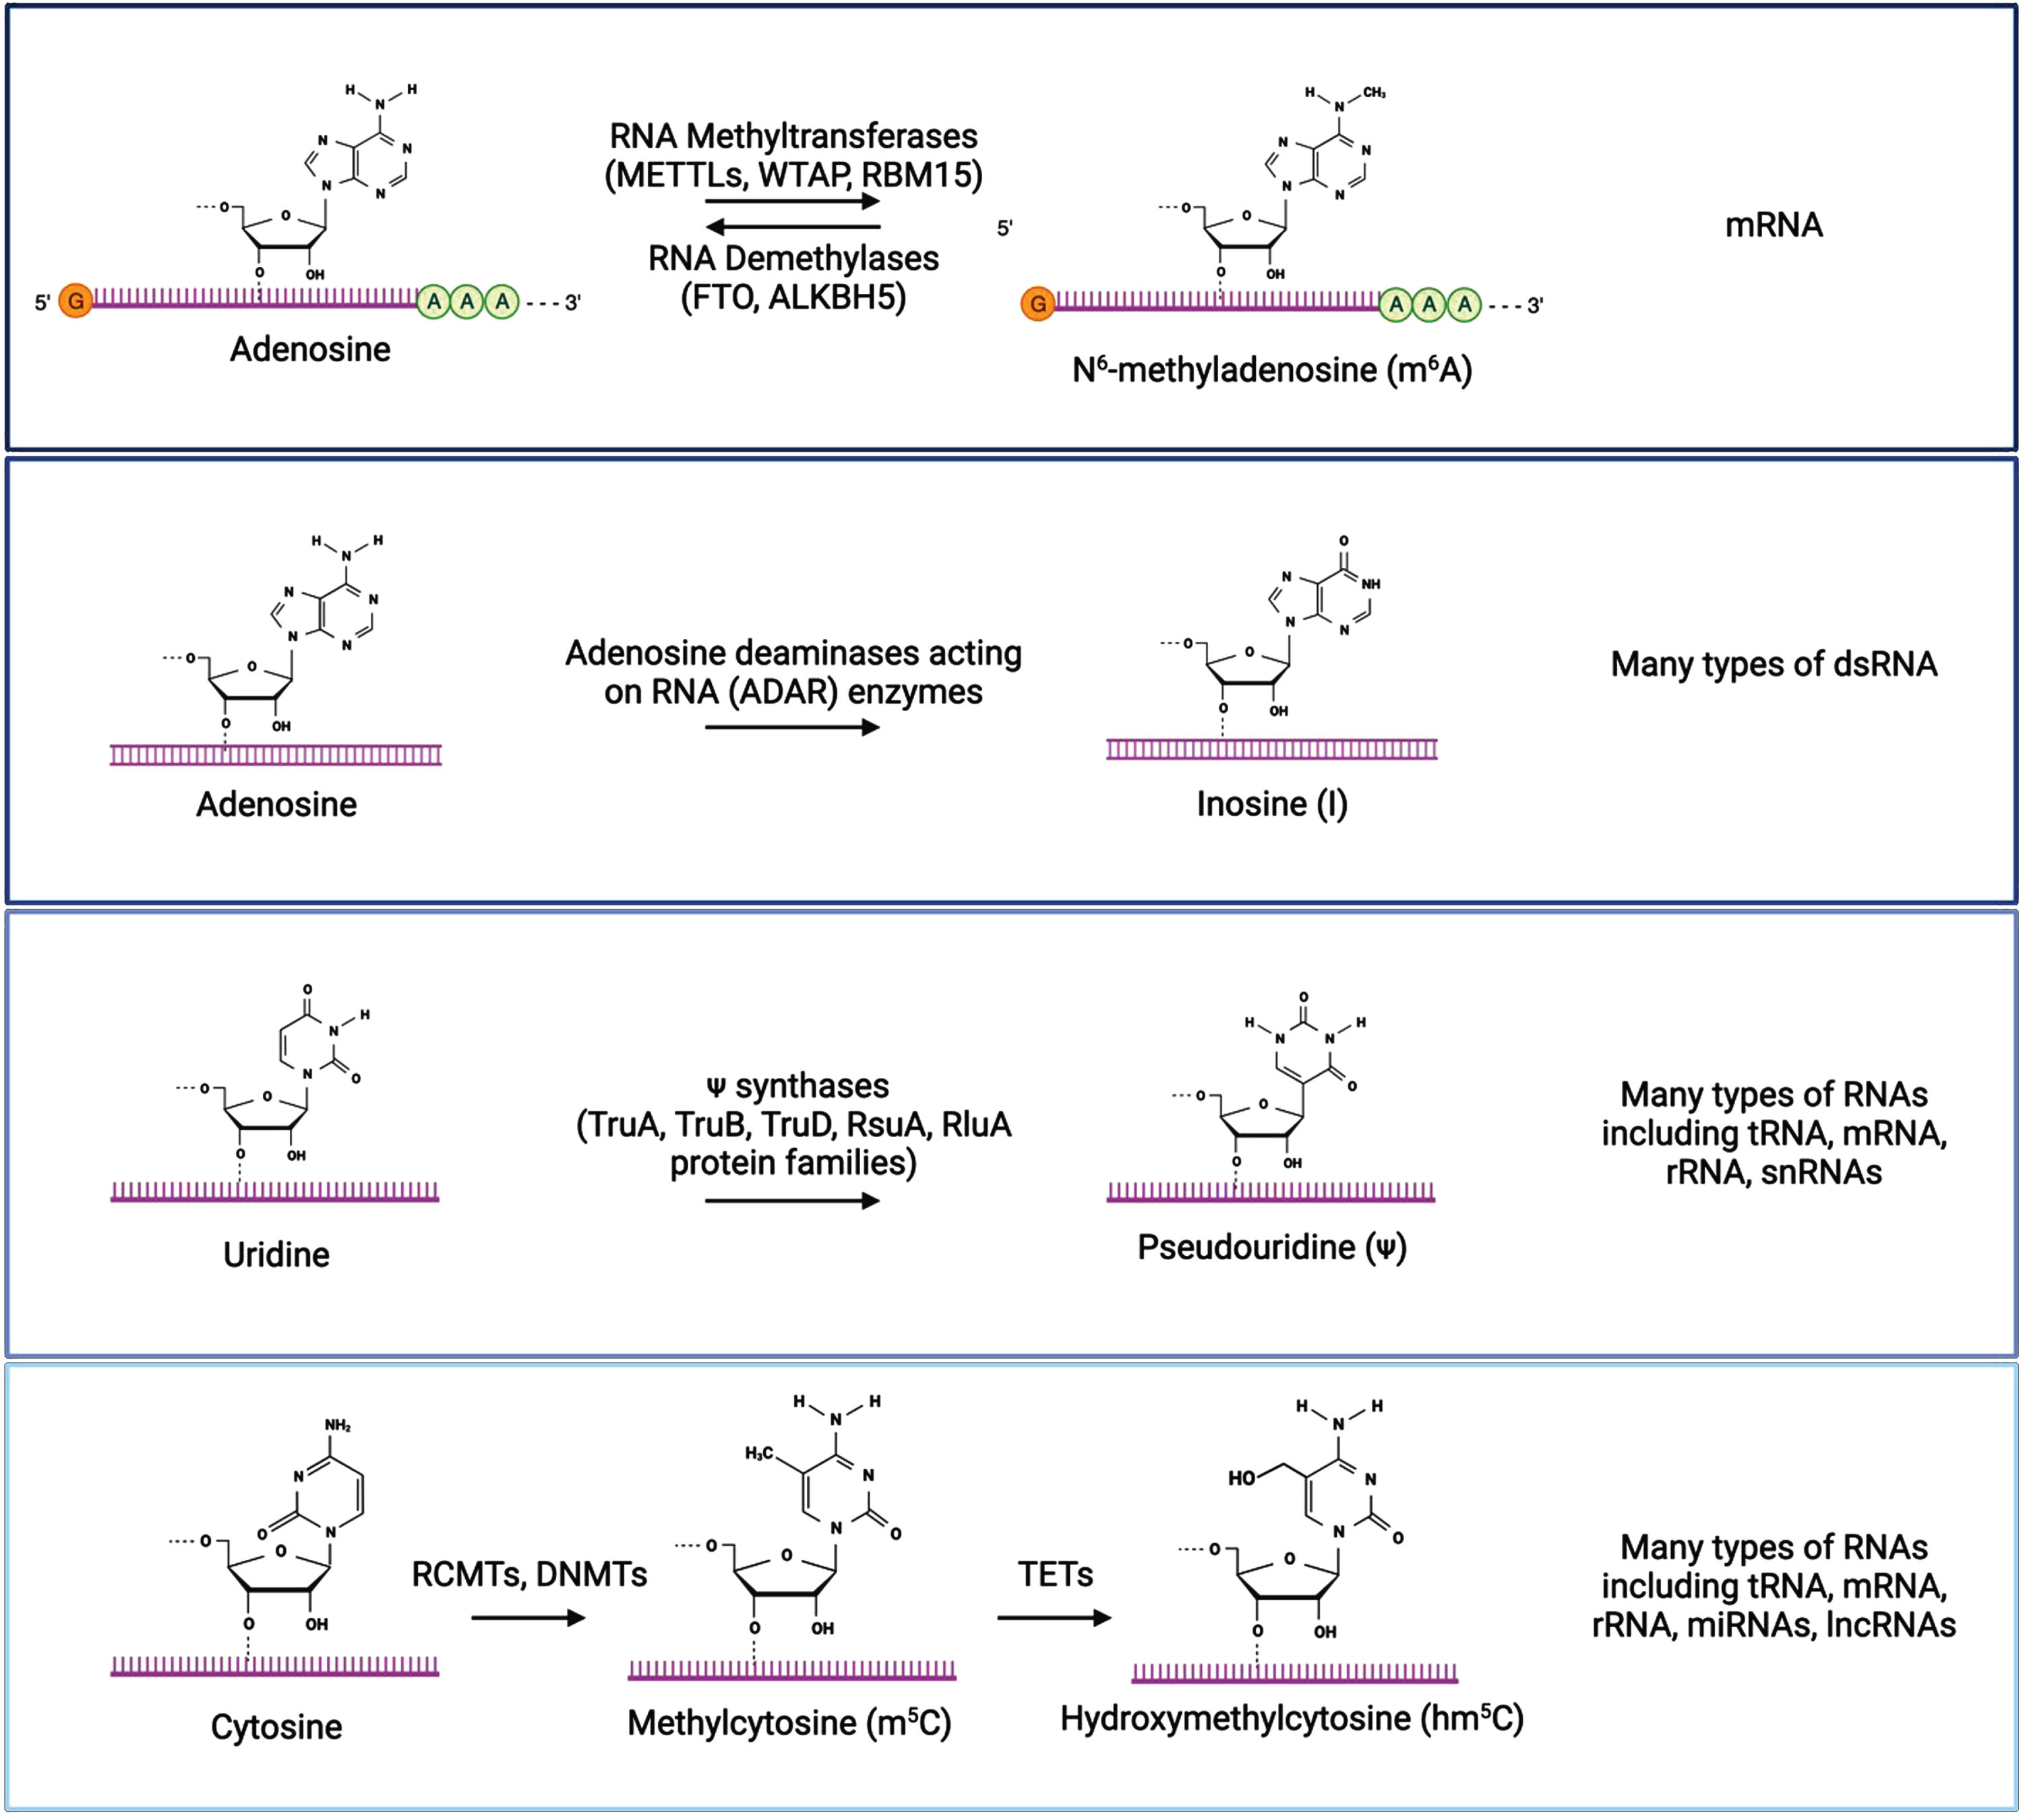 The most well characterized RNA modifications are m6A, inosine, pseudouridine, and cytosine methylation/hydroxymethylation. Chemical structures of modified and unmodified bases are show, along with enzymes that mediate these modifications and the types of RNA molecules where each modification is typically found. Created with BioRender.com.